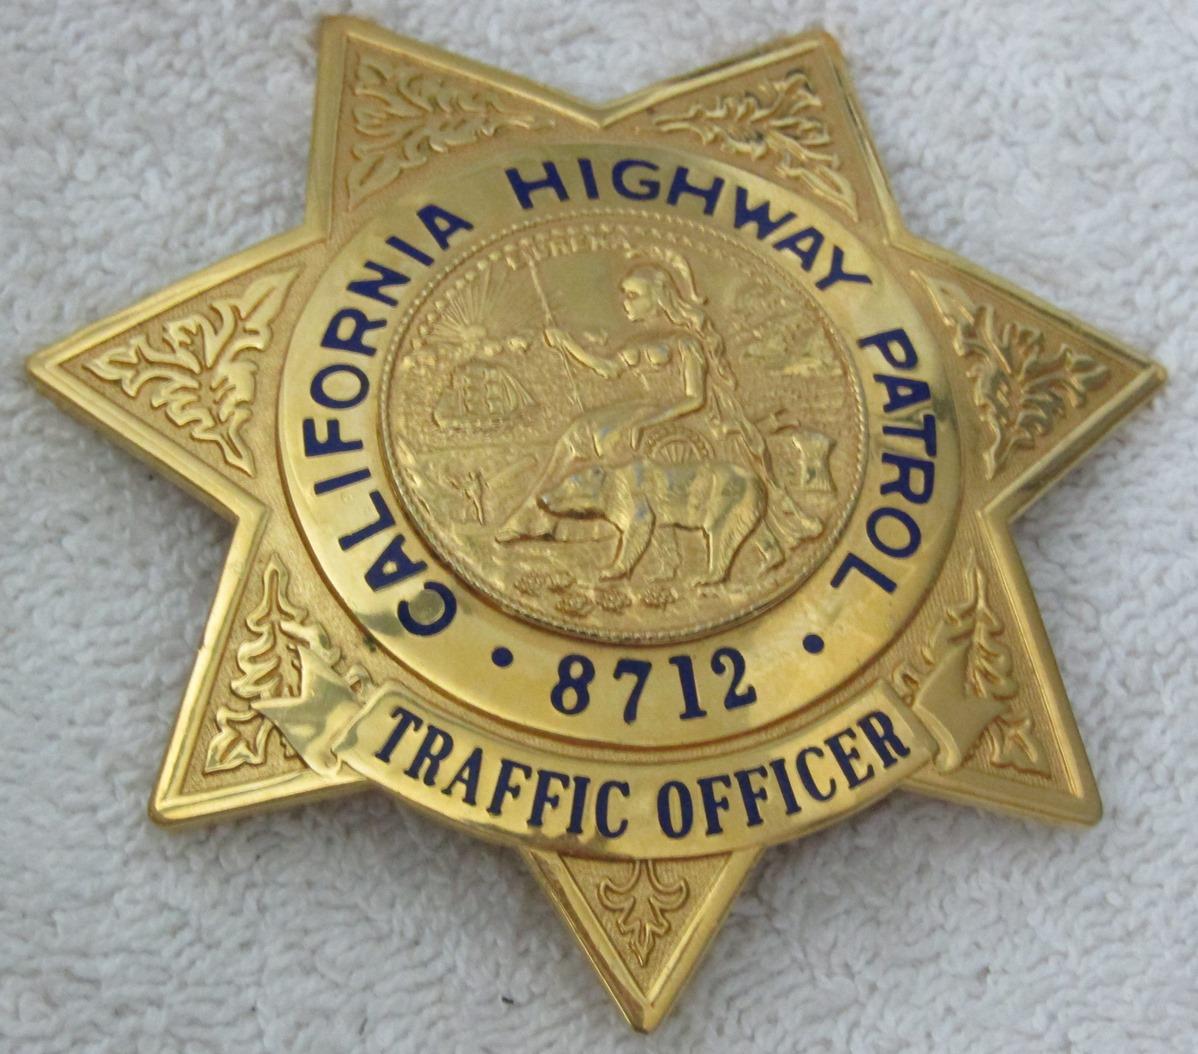 Ca. 1950-60's "CALIFORNIA HWY PATROL TRAFFIC OFFICER" 7 Point Star Badge-Numbered